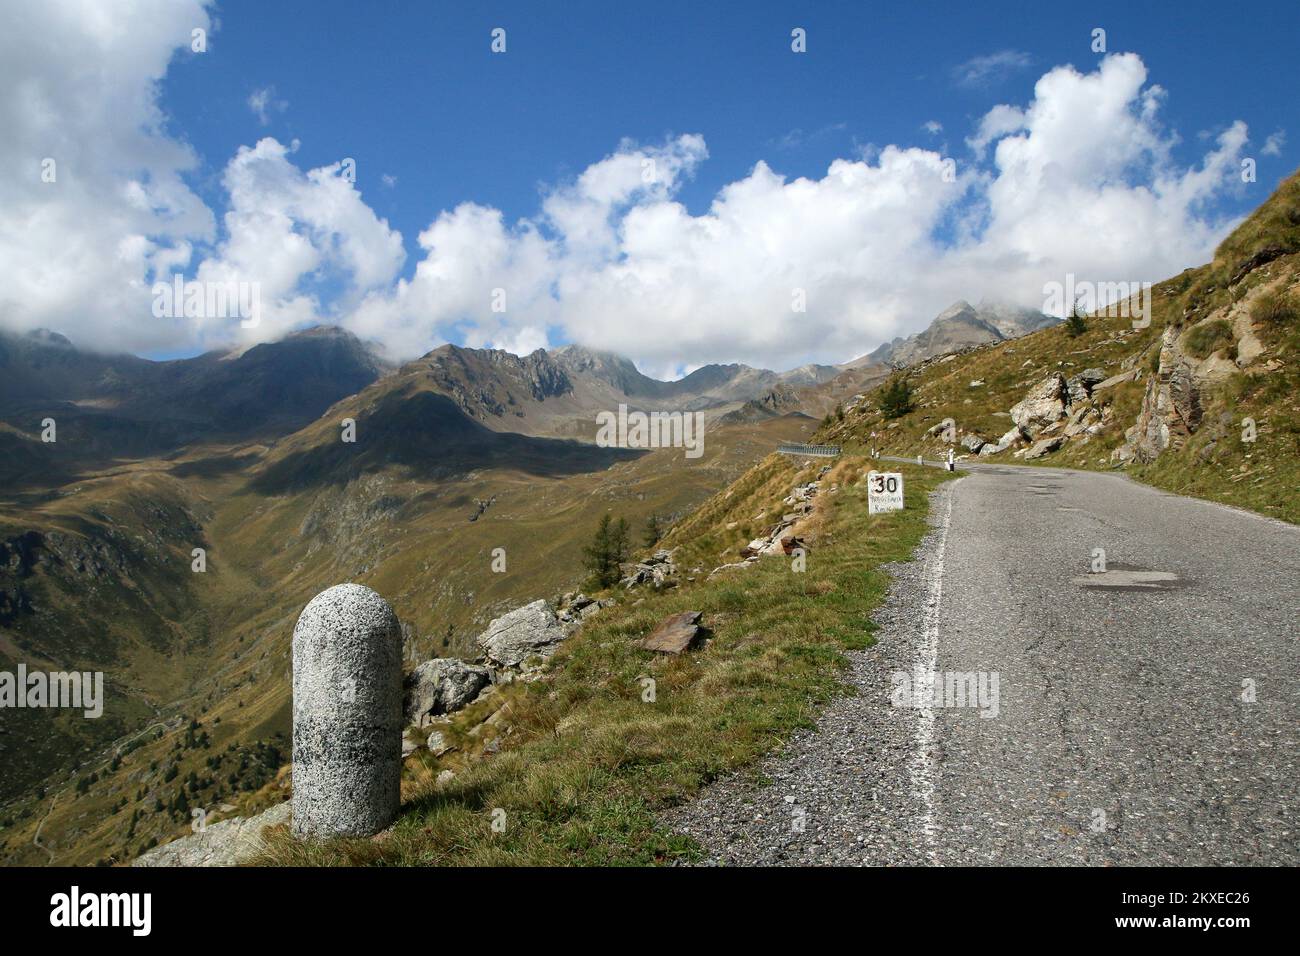 The view of the road climbing to the Passo di Gavia in Italy. The narrow and challenging road towards the summit. Stock Photo